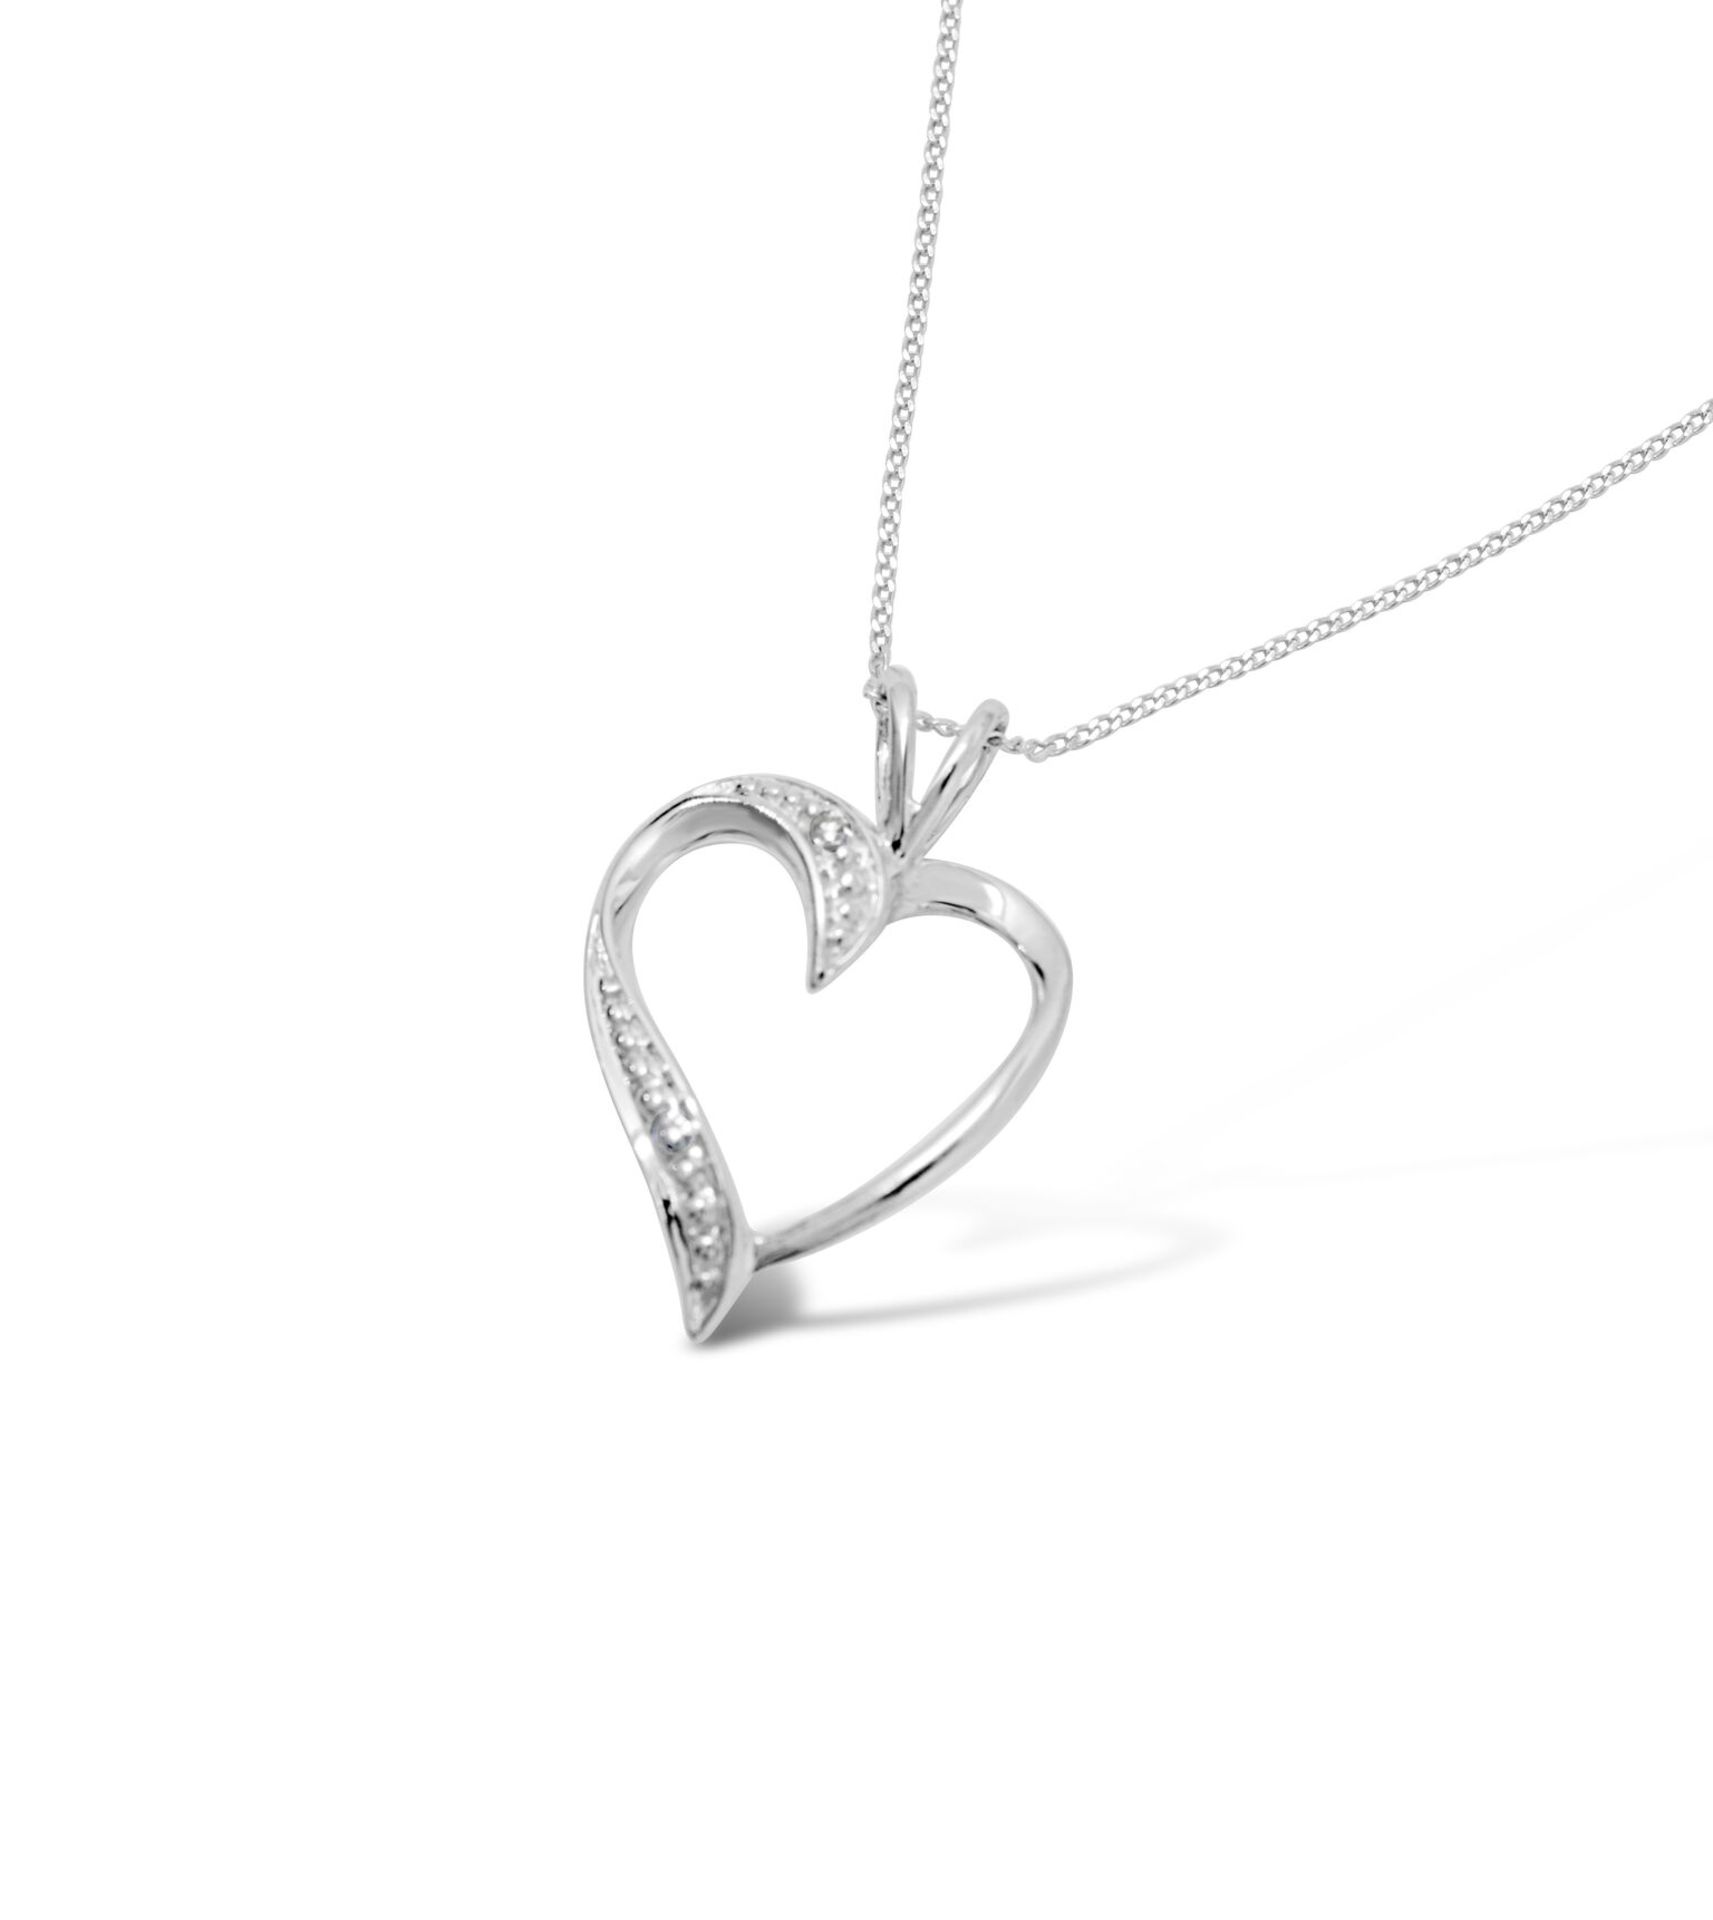 Heart Shaped Diamond Pendant with a Gold Chain